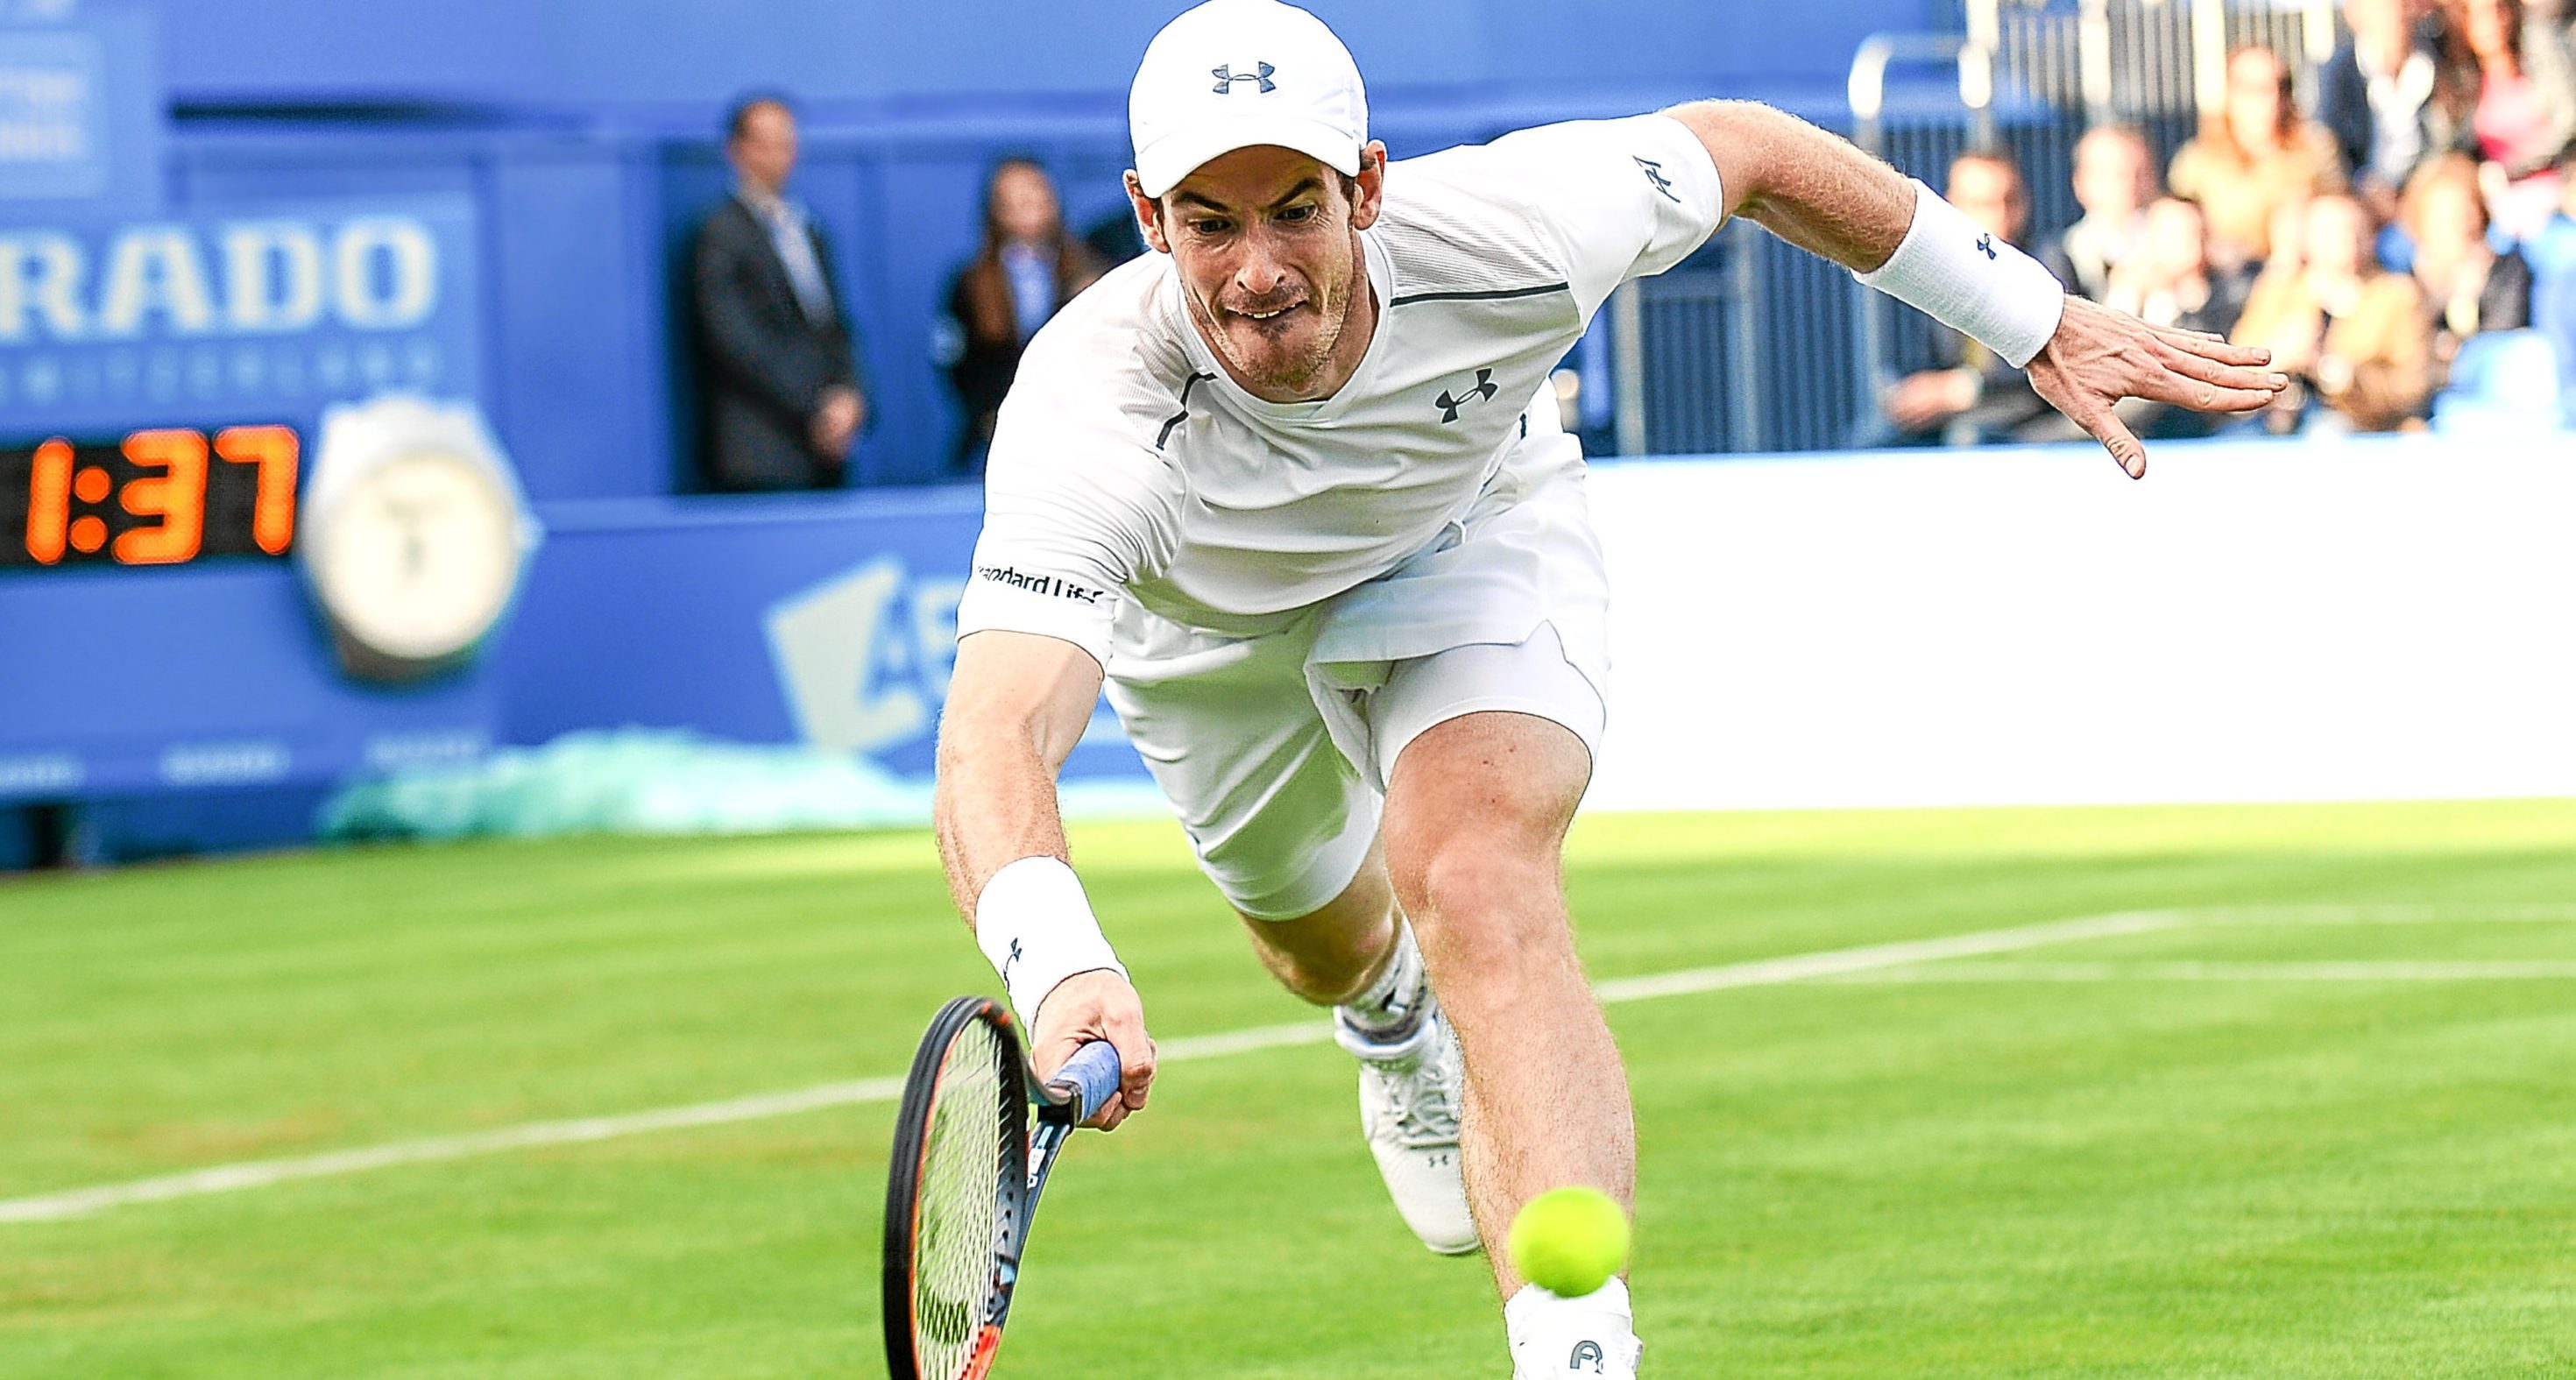 Andy Murray chases after a ball during the match against Nicolas Mahut.